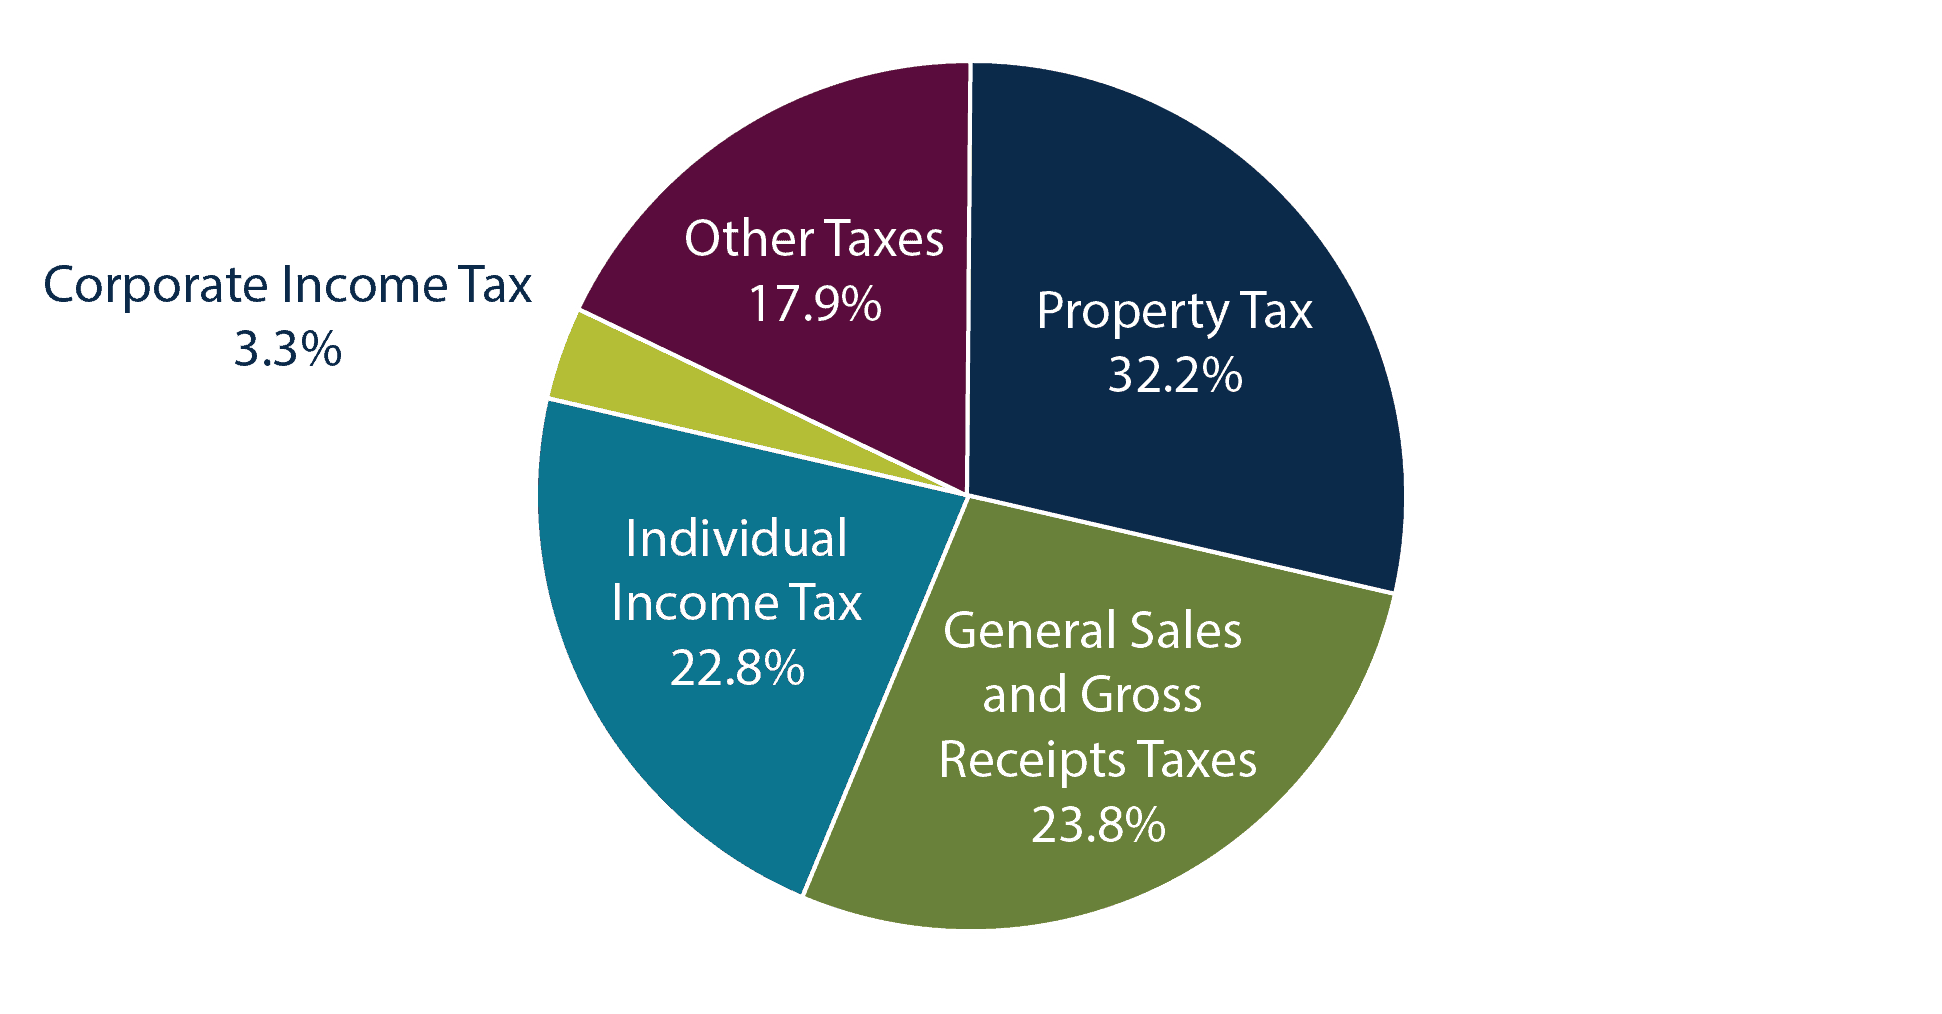 Pie chart showing stats for various taxes. Property tax 32.2 percent, General Sales and Gross Receipts taxes 23.8 percent.